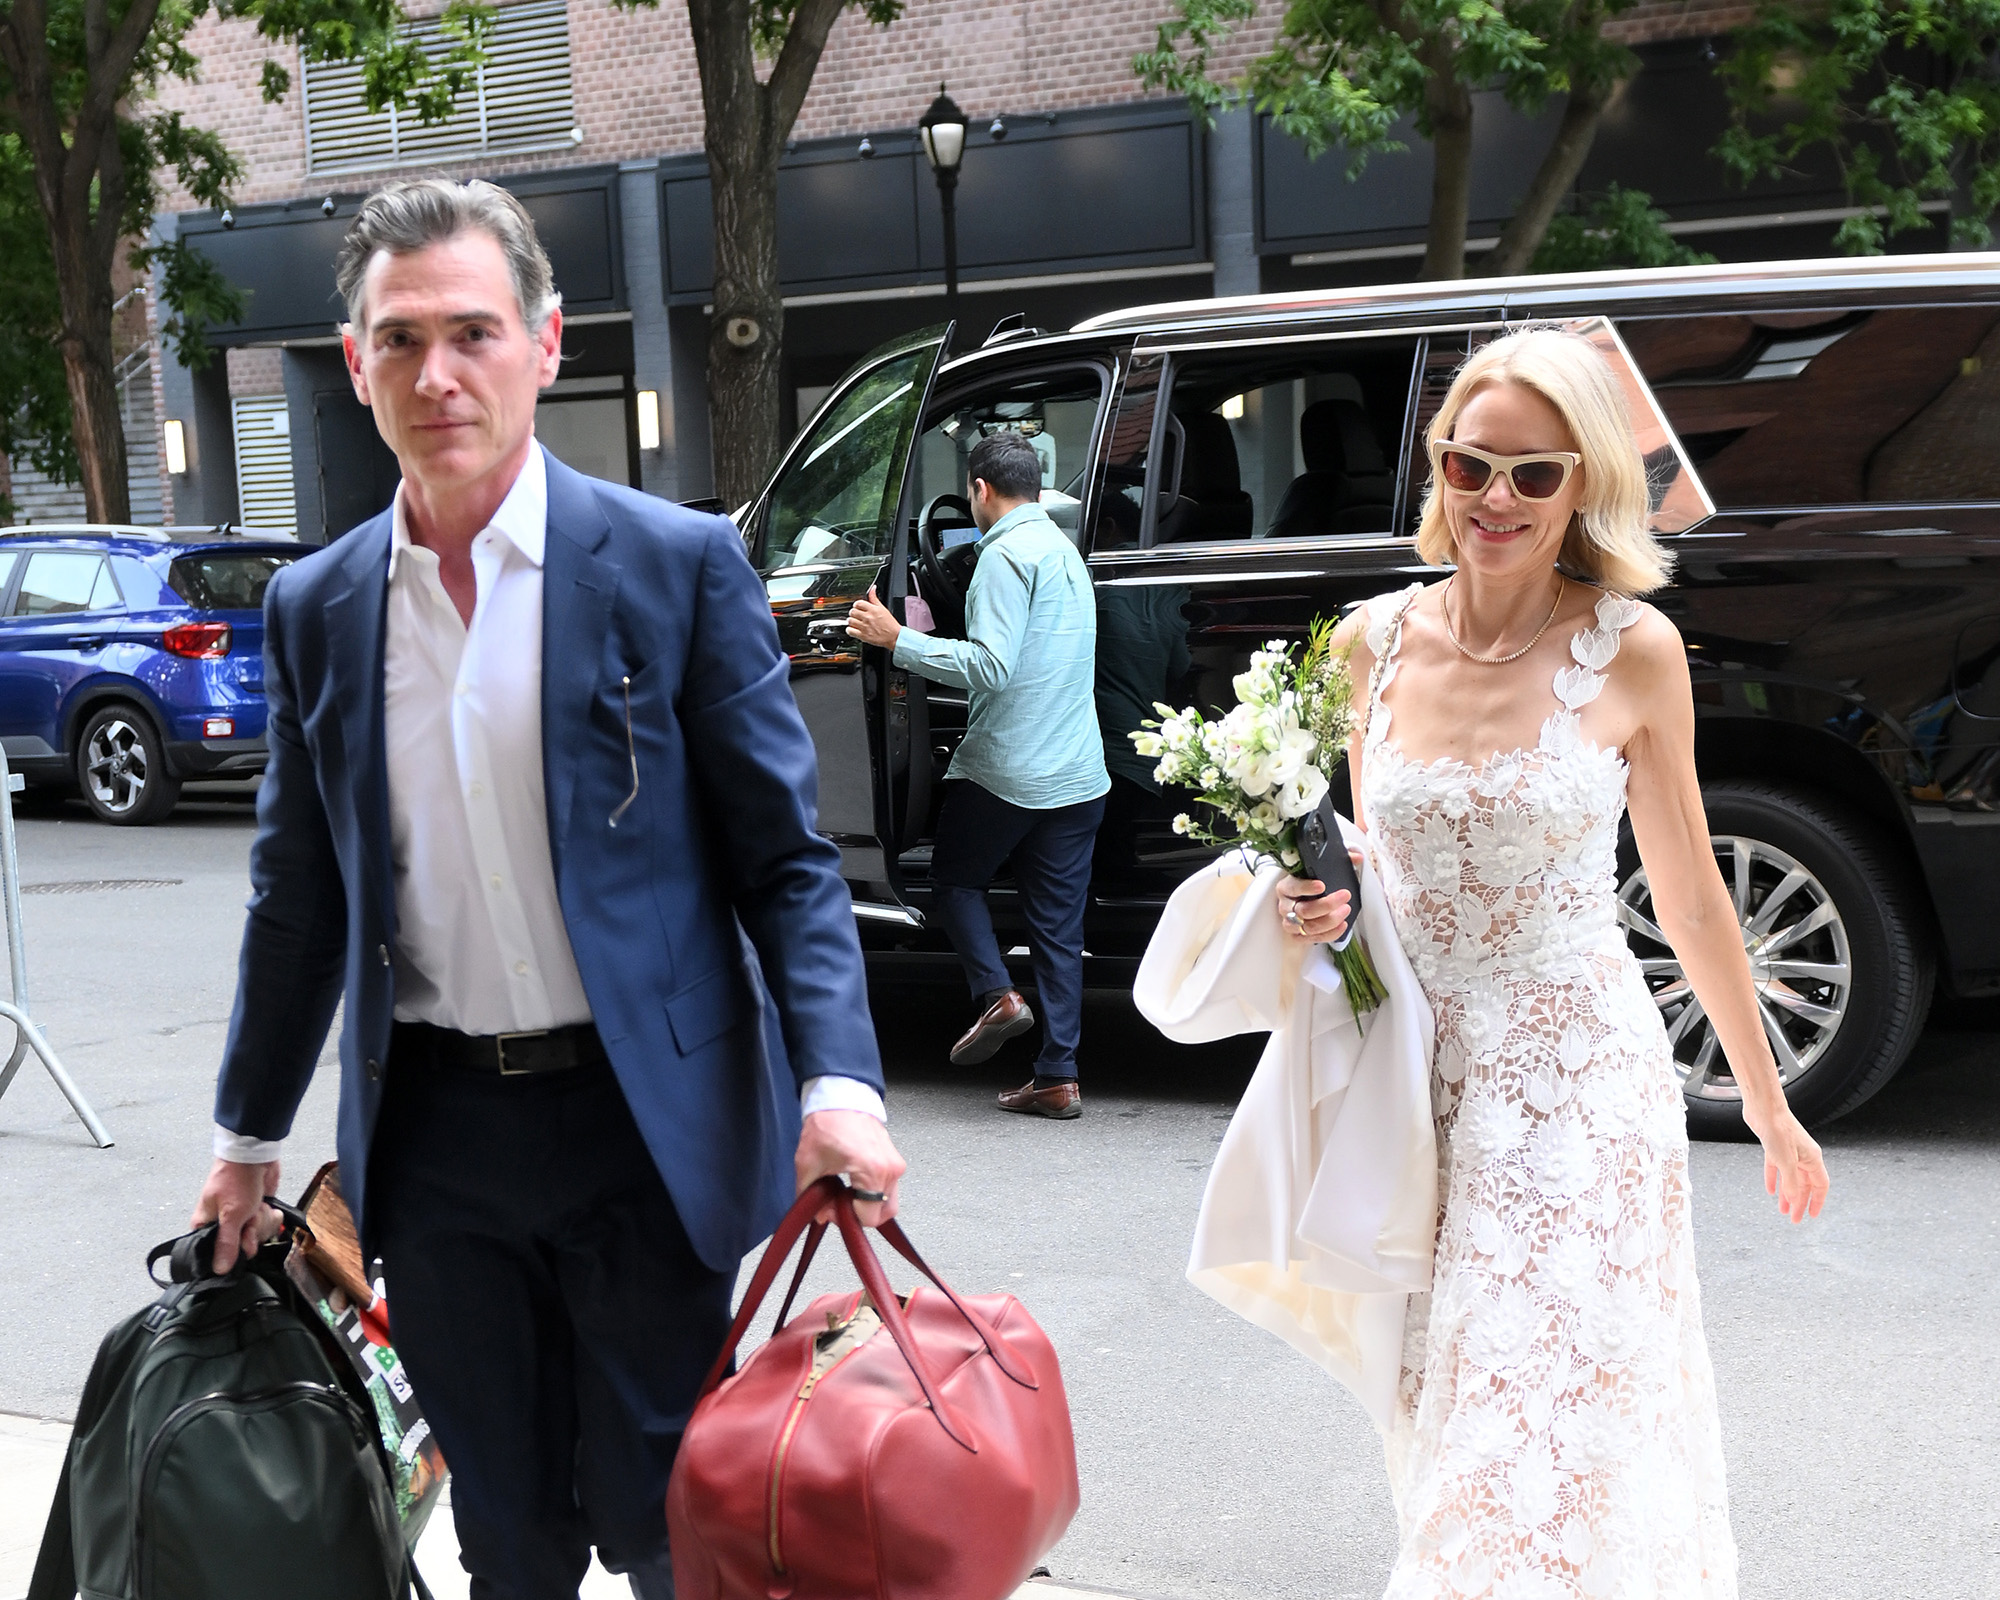 Naomi Watts Wore an Exquisite White Lace Dress for Her New York